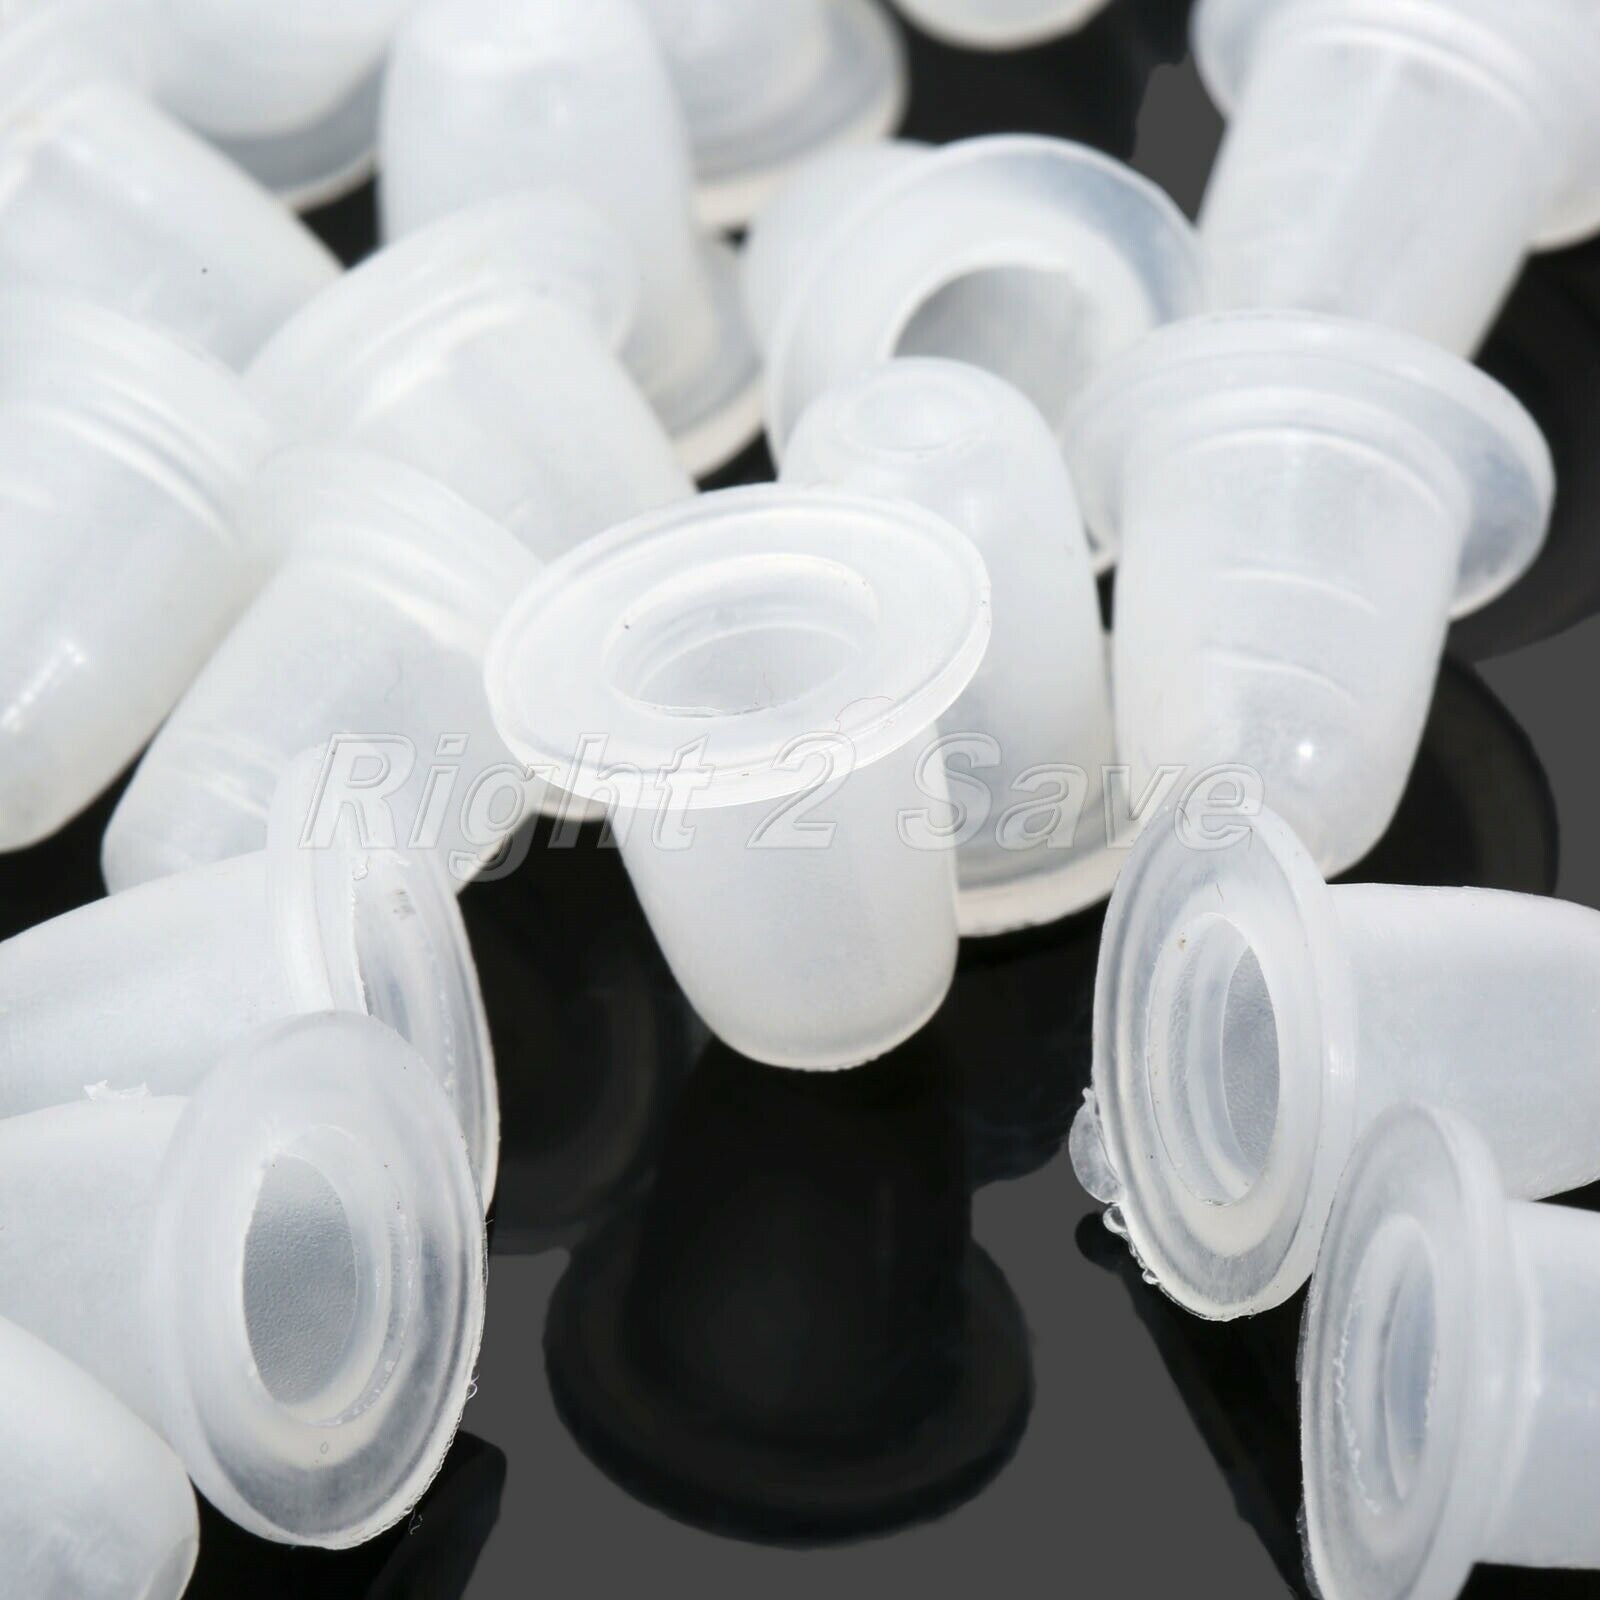 Ink Cups Caps 50pcs Soft Silicone For Tattoo Machine Needles Eyebrow Lip Makeup